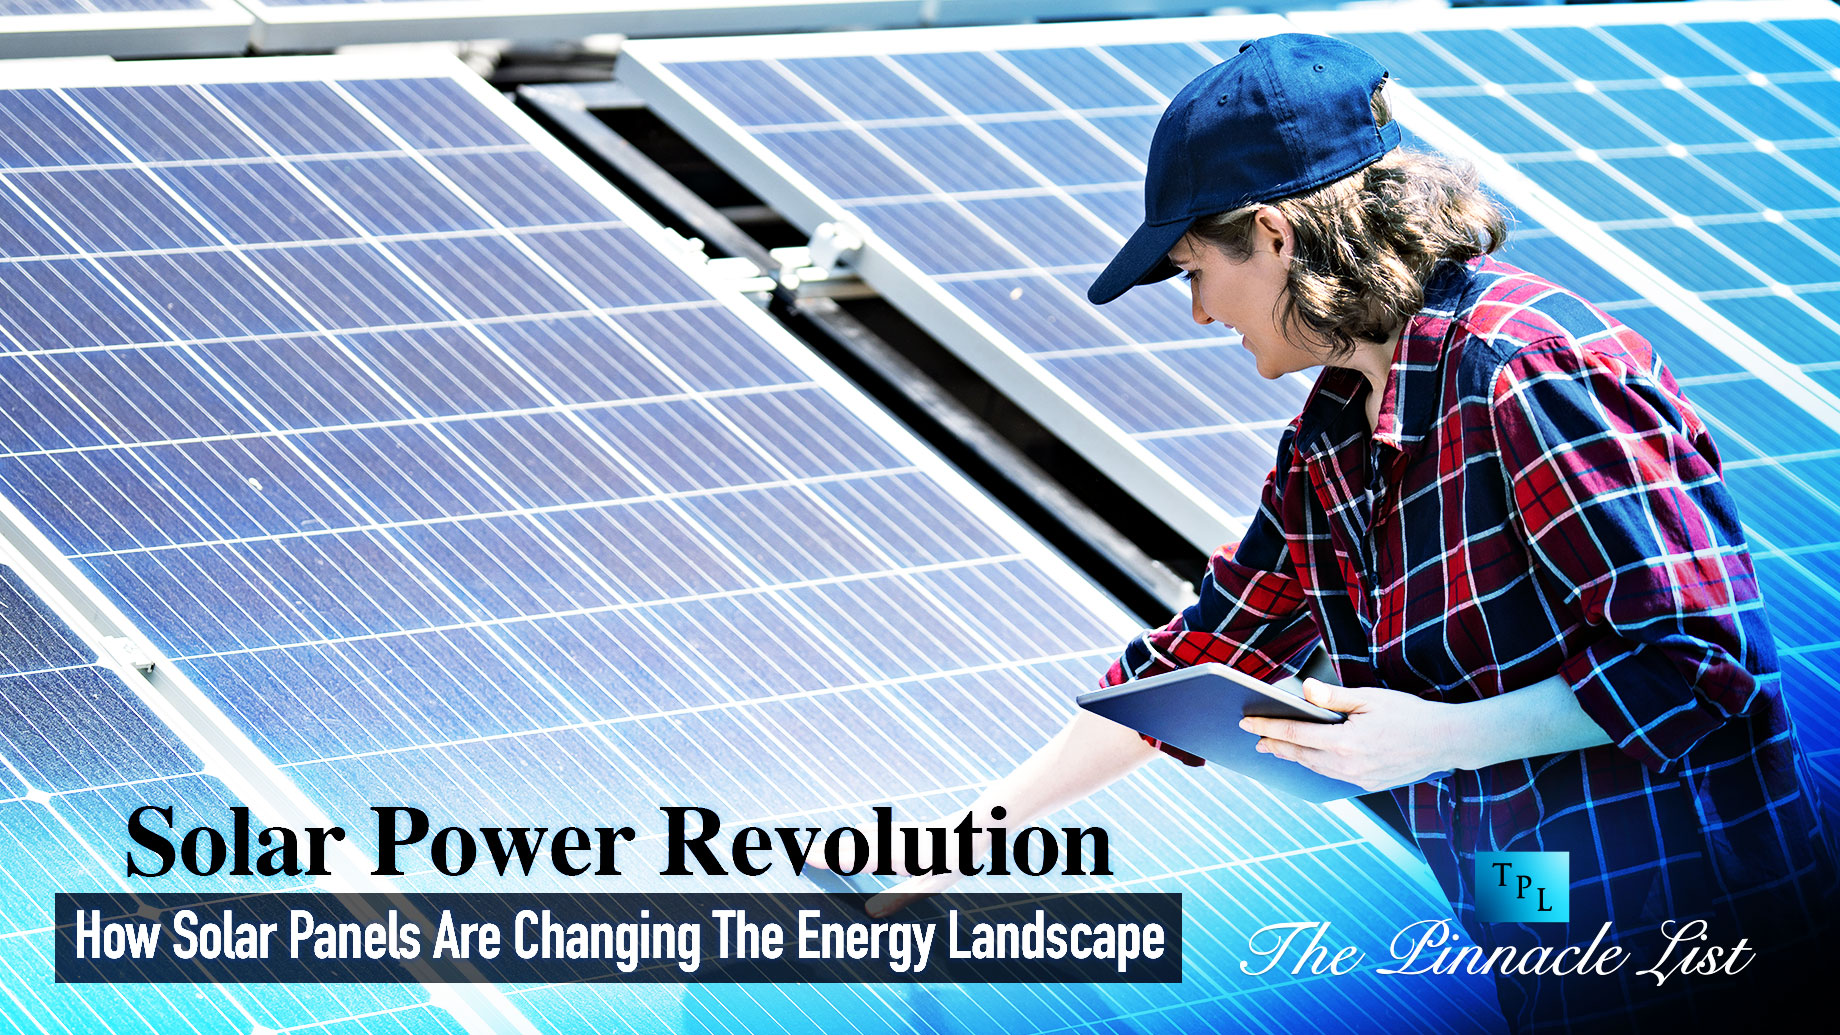 Solar Power Revolution: How Solar Panels Are Changing The Energy Landscape